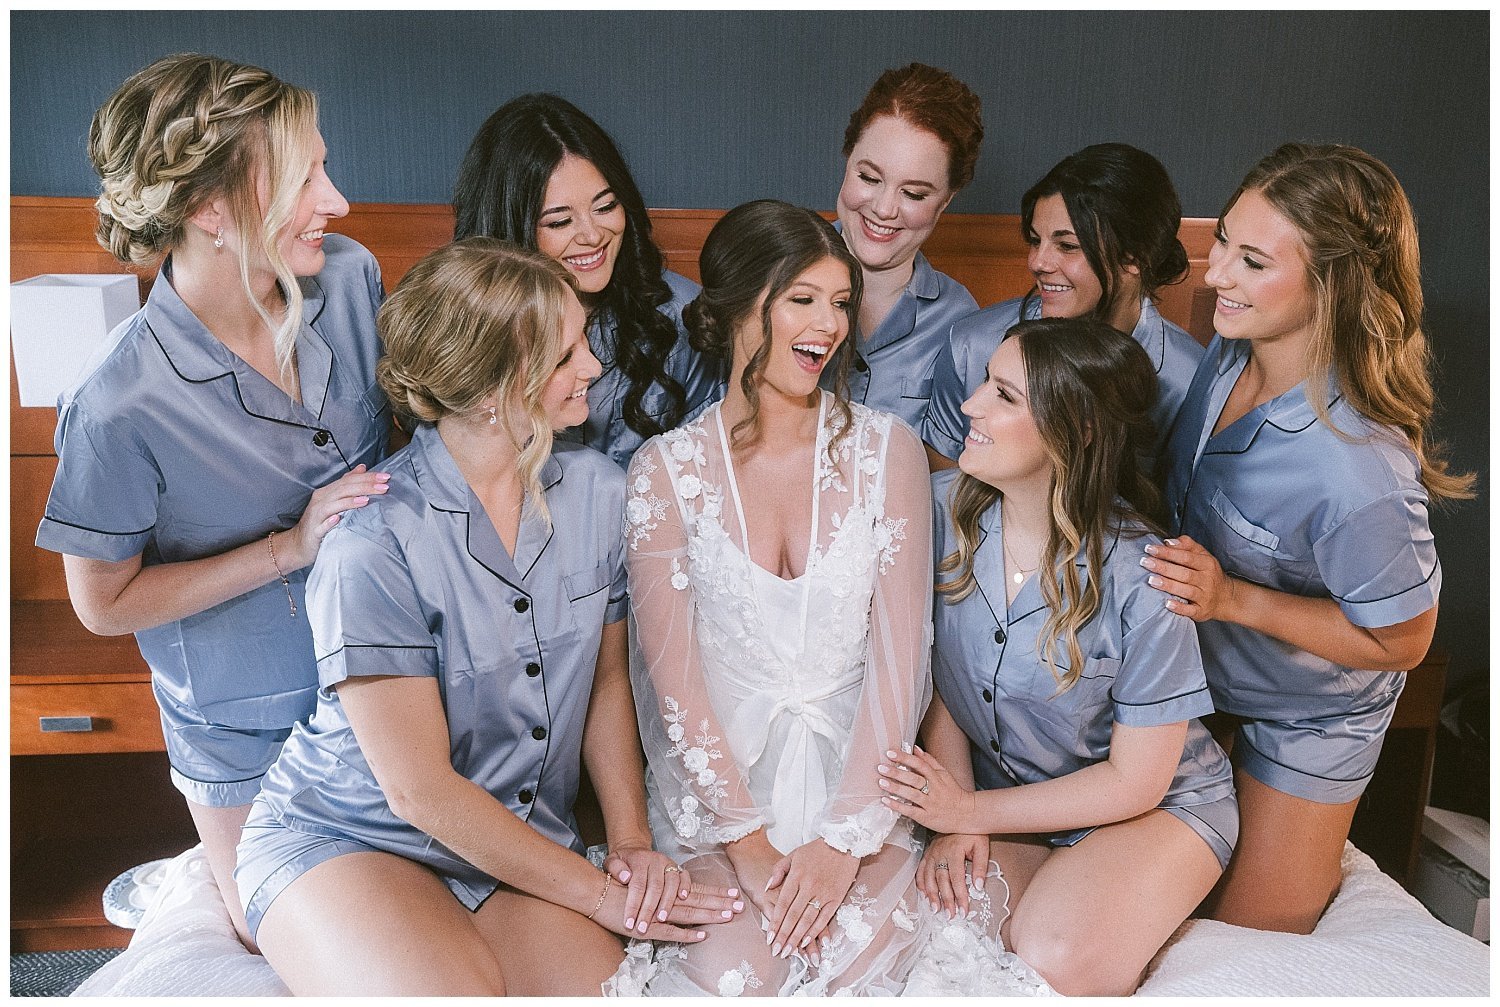 A bride and bridesmaid in matching pajamas on a bed posing for wedding photos